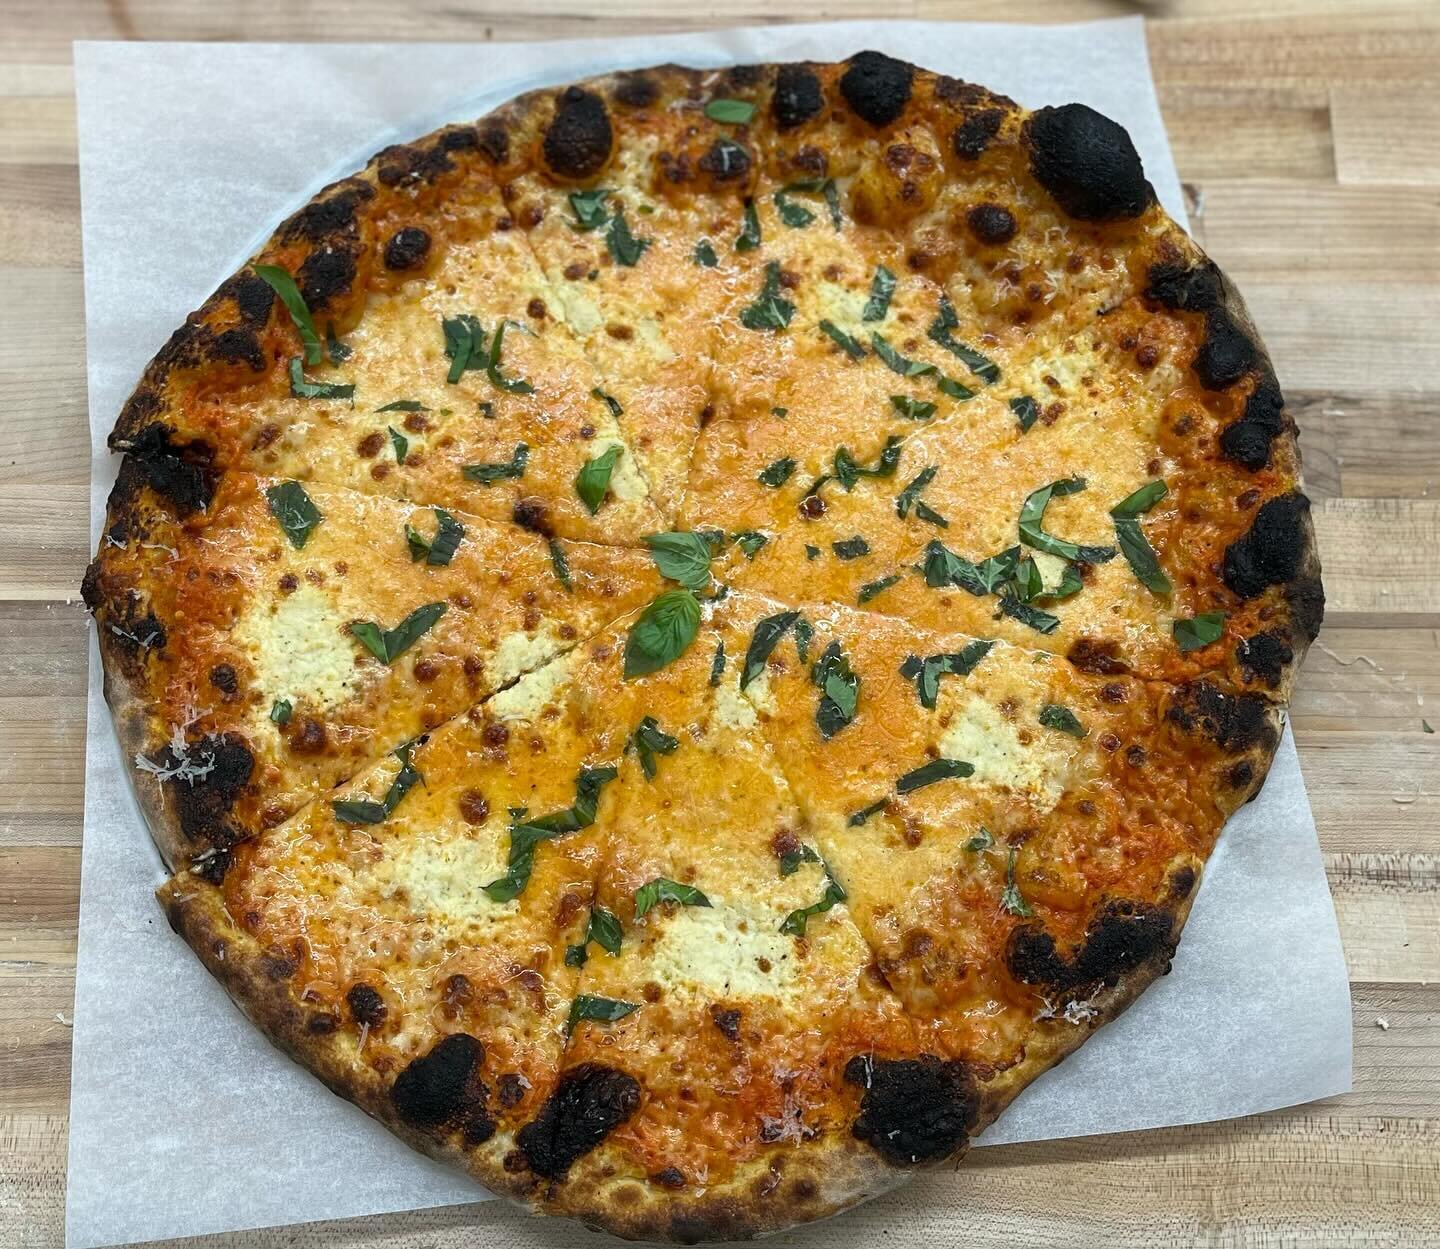 Pizza pie special this week! 

Vodka sauce, mozzarella, ricotta, shredded basil and pecorino. So good. Will it get you drunk? No. Will it make you want to wrestle a bear? Maybe. 🤌🐻

Serving it up through the week or until we sell out!